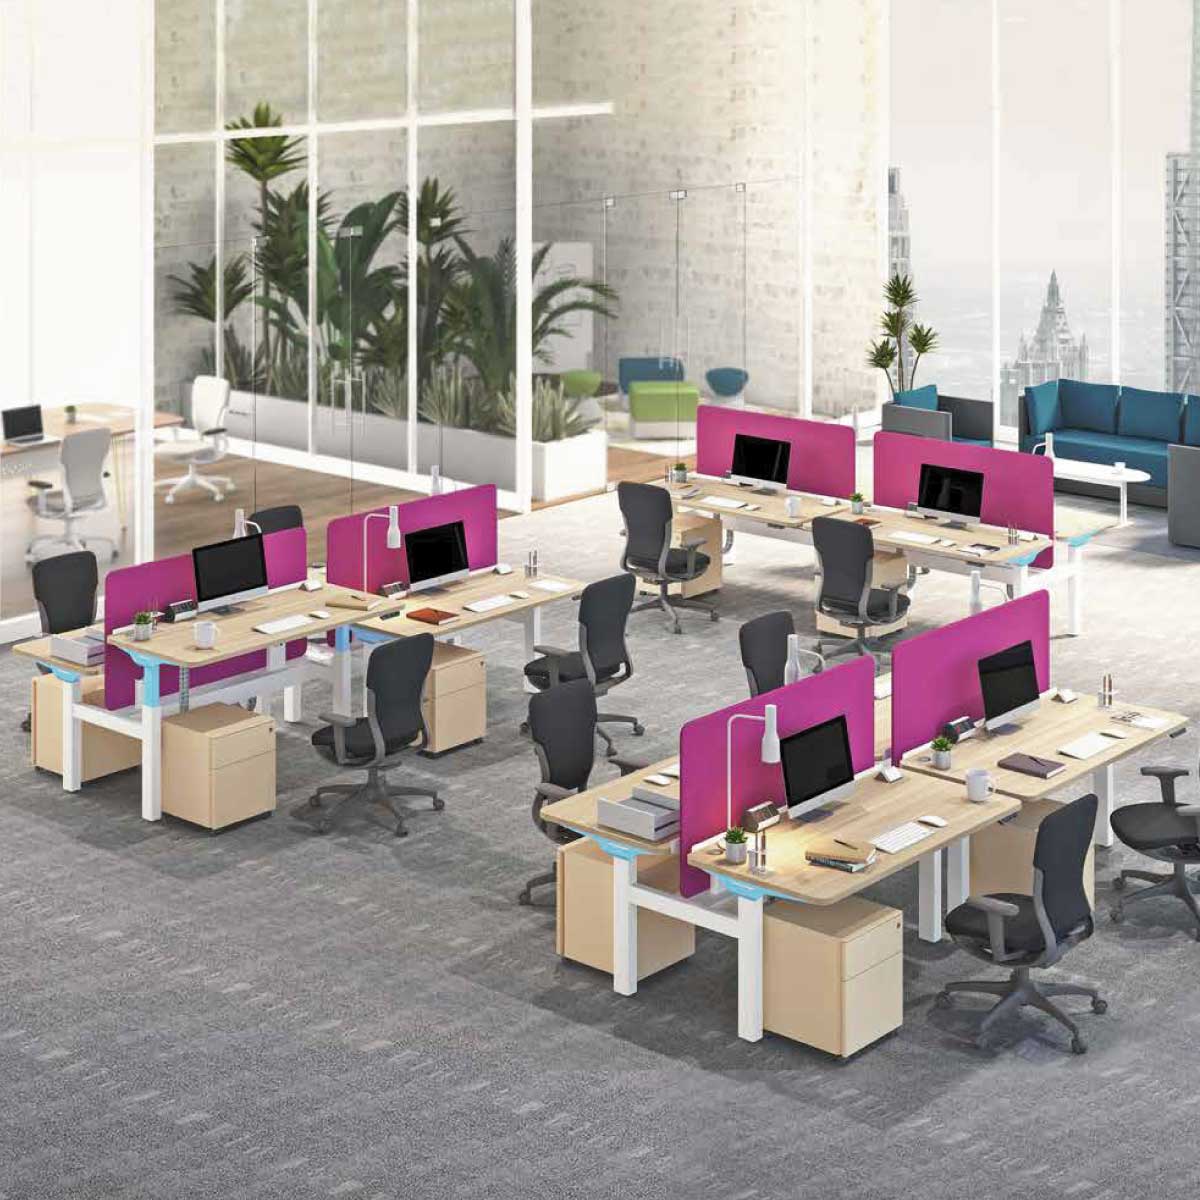 Computer Workstation Tables Manufacturers, Suppliers in Faridabad Sector 15